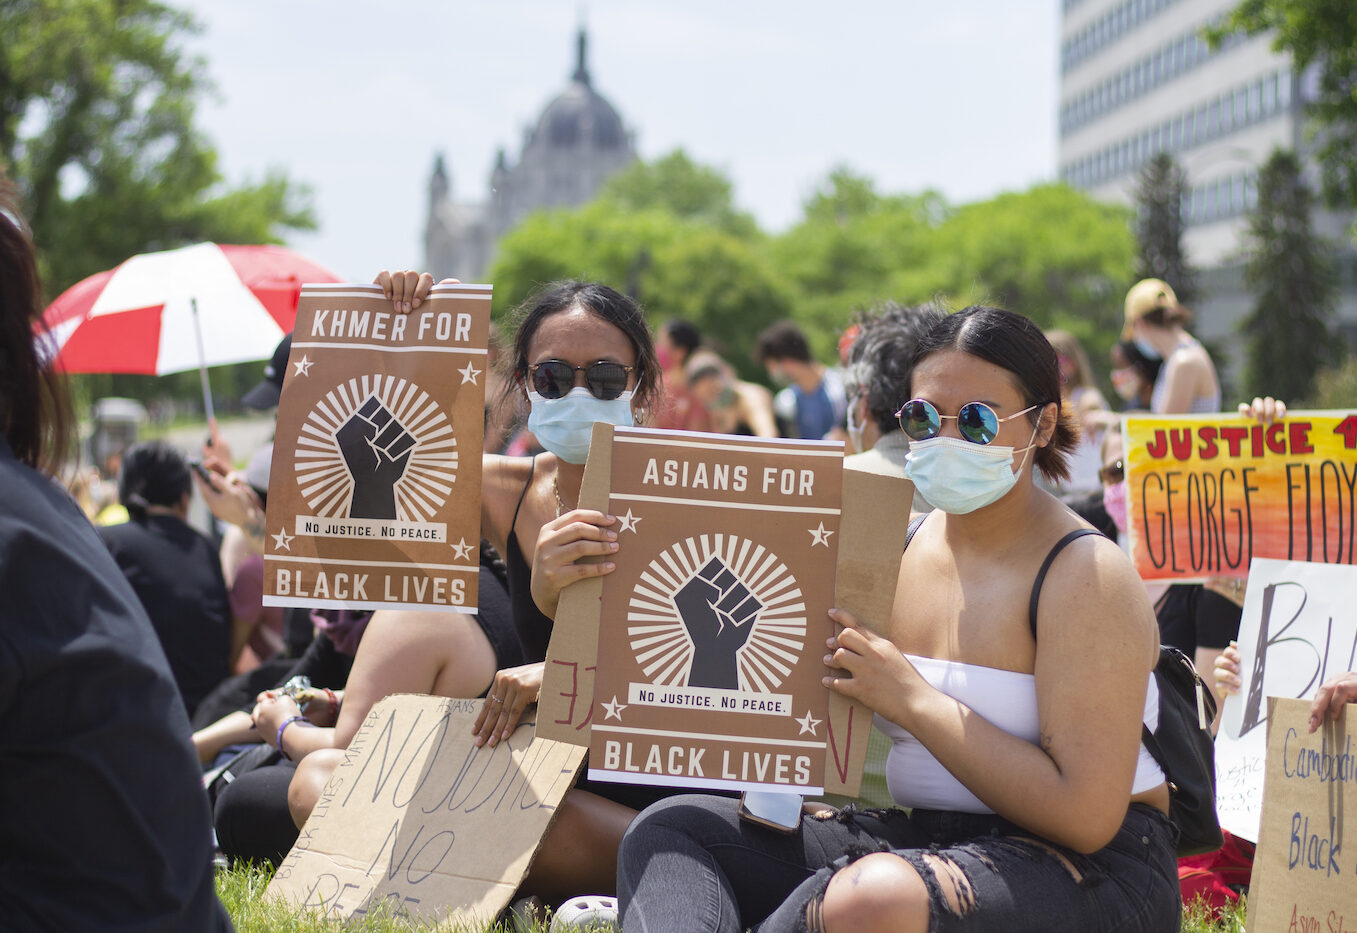 Two people with masks at a demonstration holding signs that read "Asians for Black Lives"